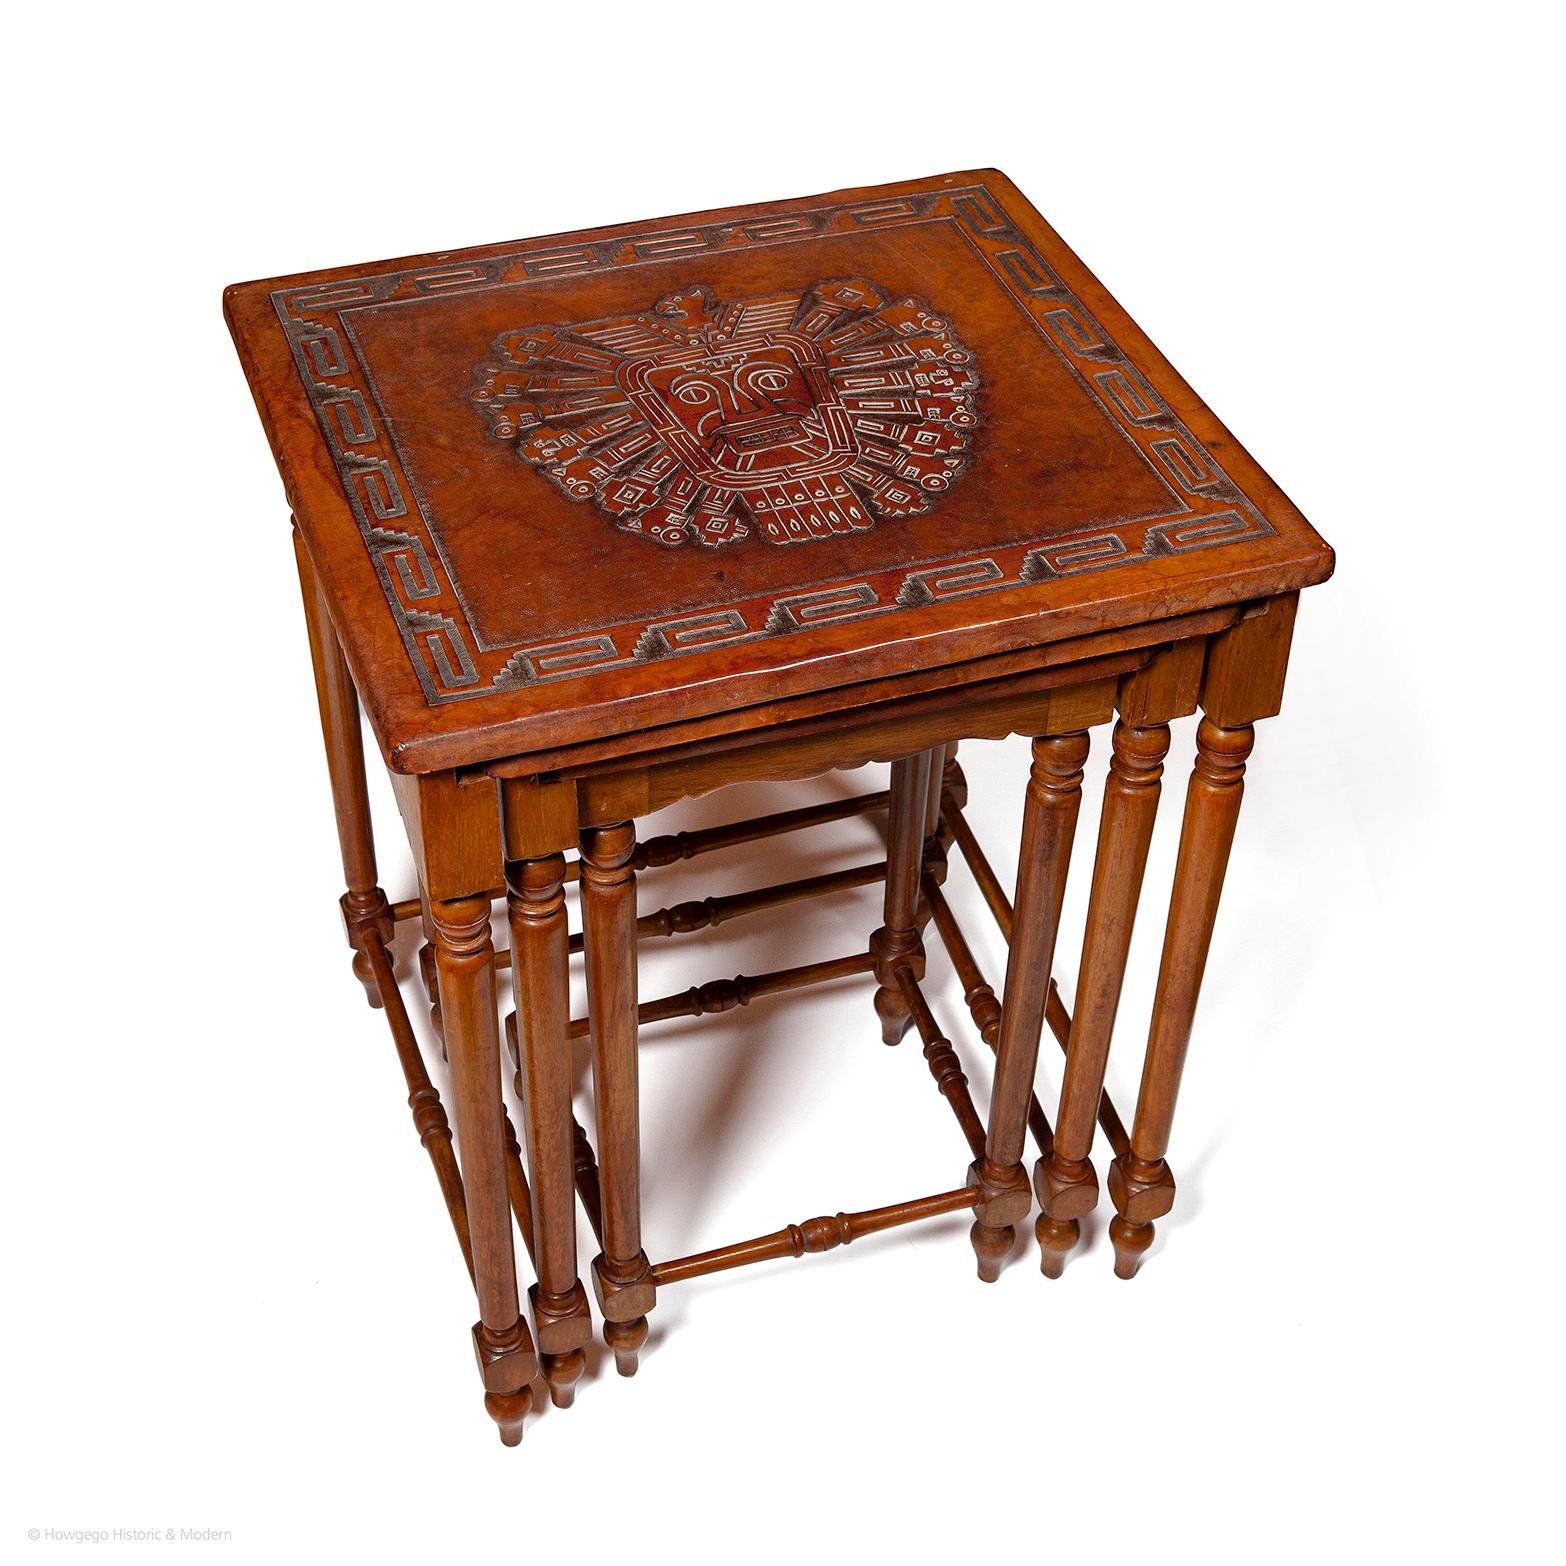 Three matching tables of decreasing size fitting inside each other all with embossed leather tops with stylized central motifs of Inca gods within geometric borders. The largest table with an embossed image of Inti the sun god,  the middle table